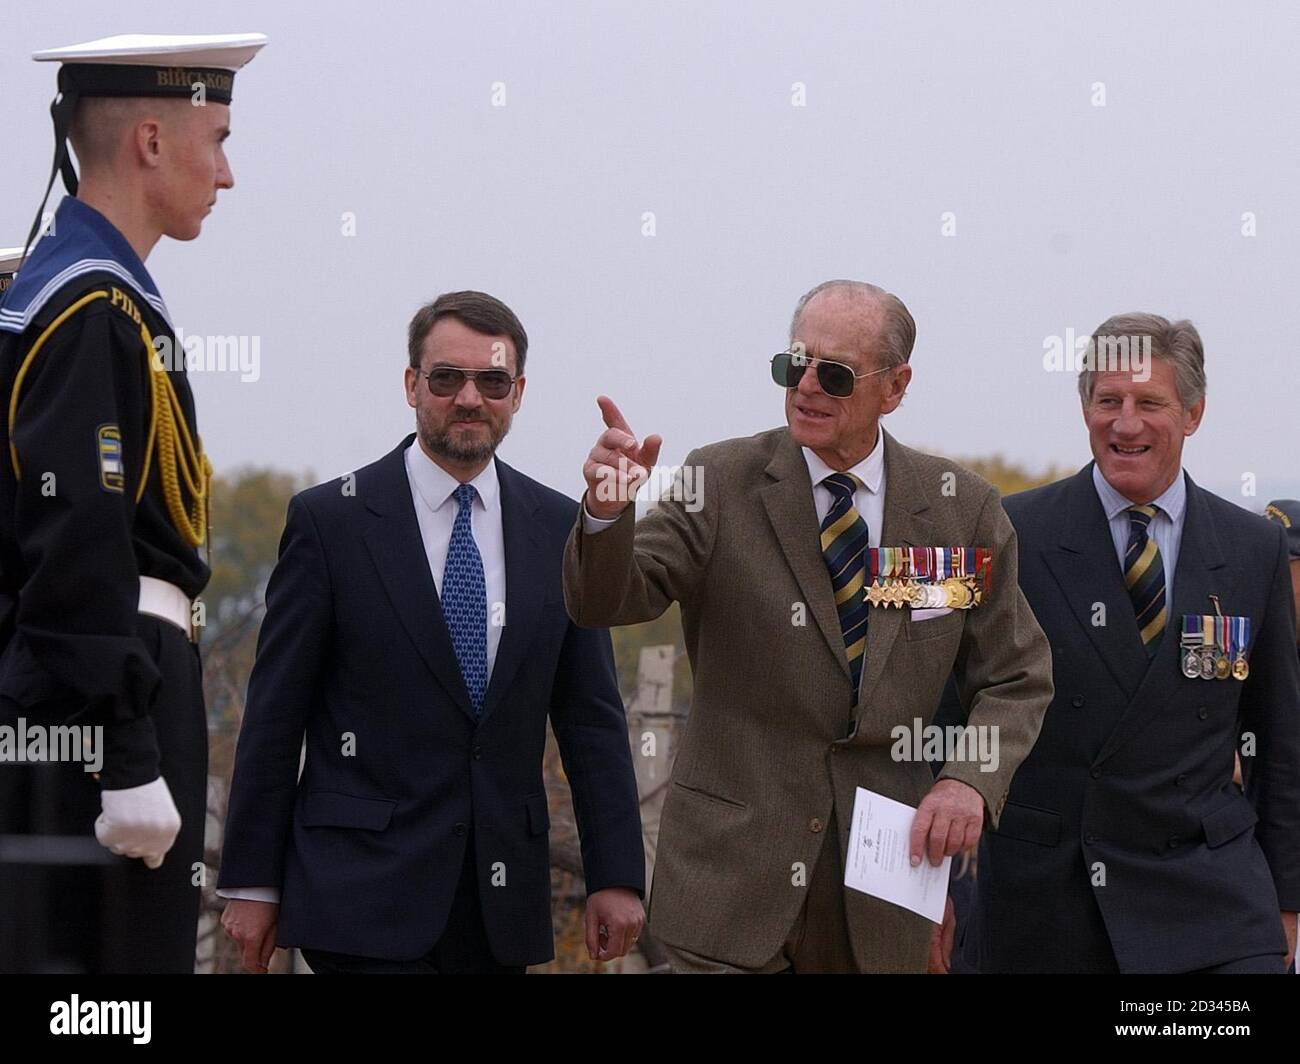 The Duke of Edinburgh wearing large sunglasses to hide a black eye, walks past a Ukrainian Naval officer at a memorial service for those who lost their lives in The Battle of Balaclava, on the 150th anniversary of The Charge of The Light Brigade, Crimea, Ukraine. Stock Photo